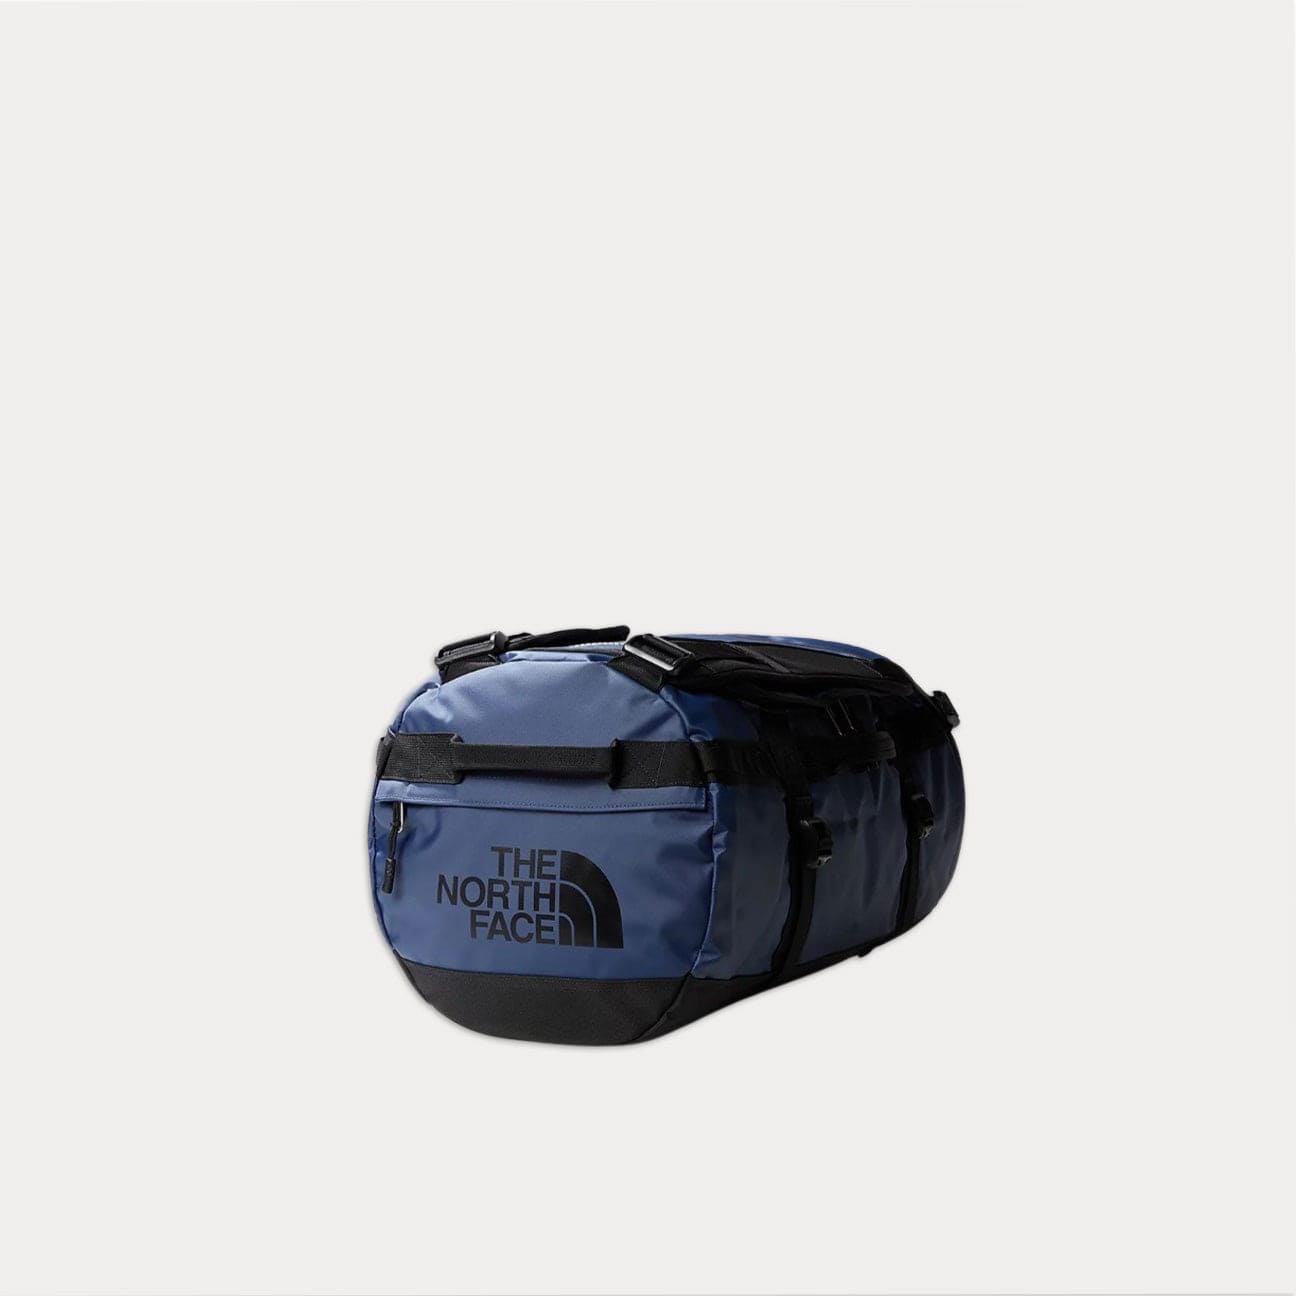 THE NORTH FACE Duffel Base Camp Small  Blue